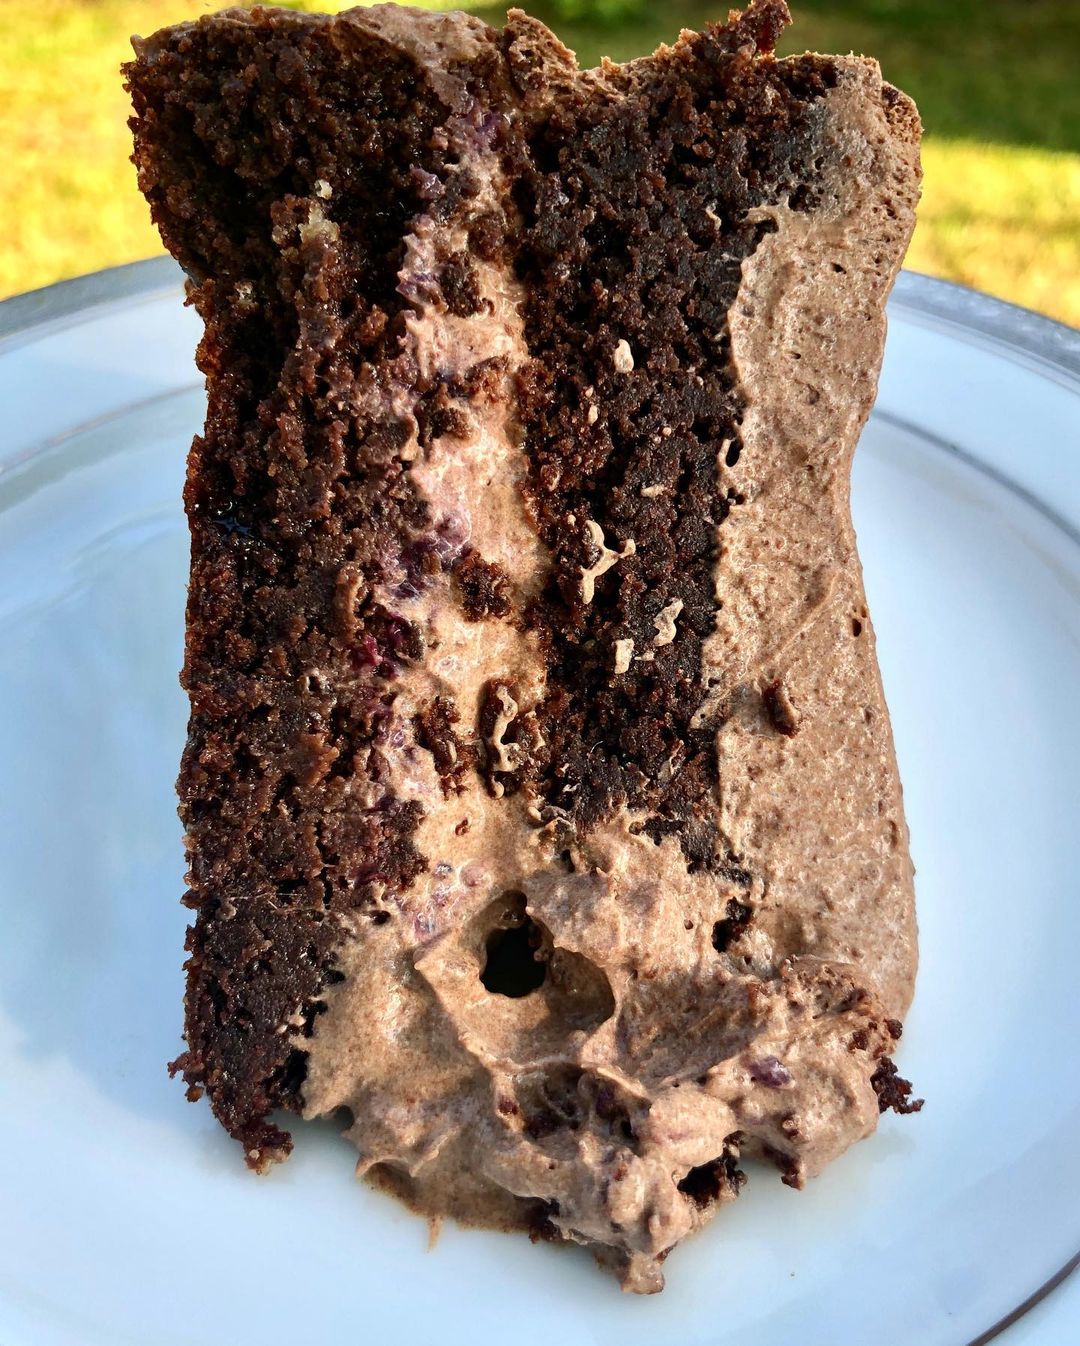 Vegan | Paleo | Gluten Free Espresso Brownie Cake with Chocolate Mousse Whipped “Frosting”